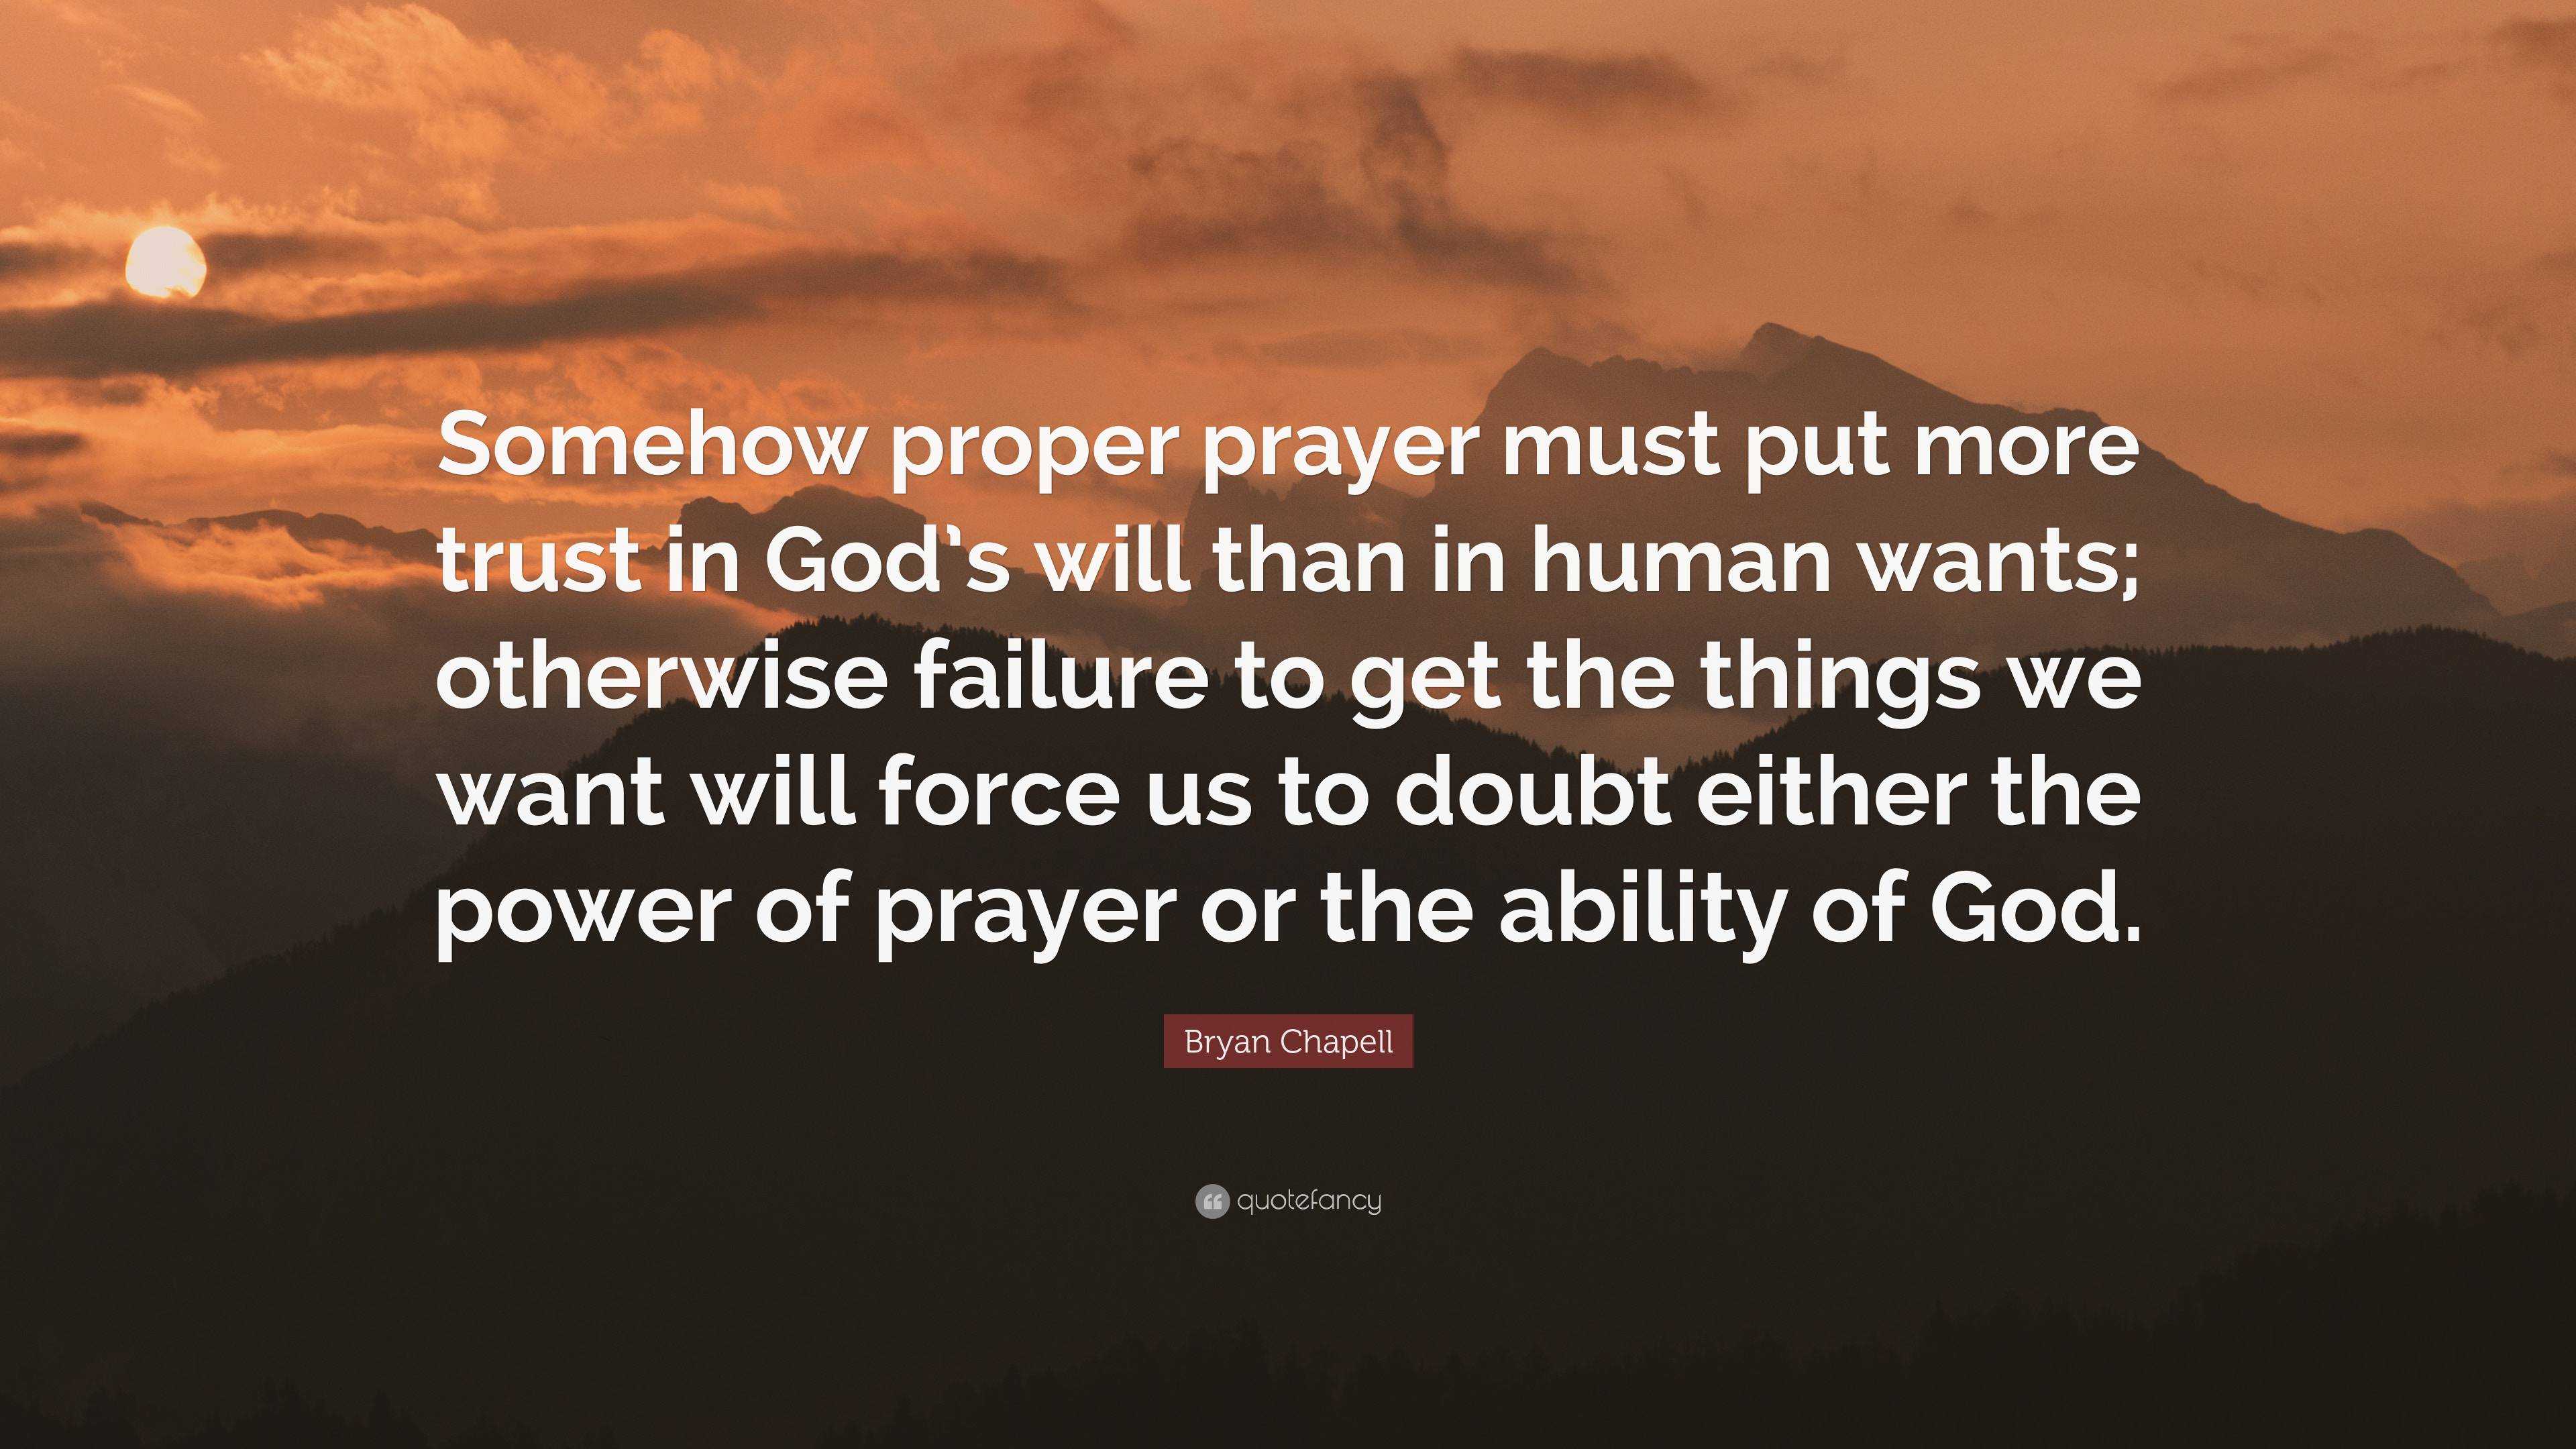 Bryan Chapell Quote: “Somehow proper prayer must put more trust in God ...